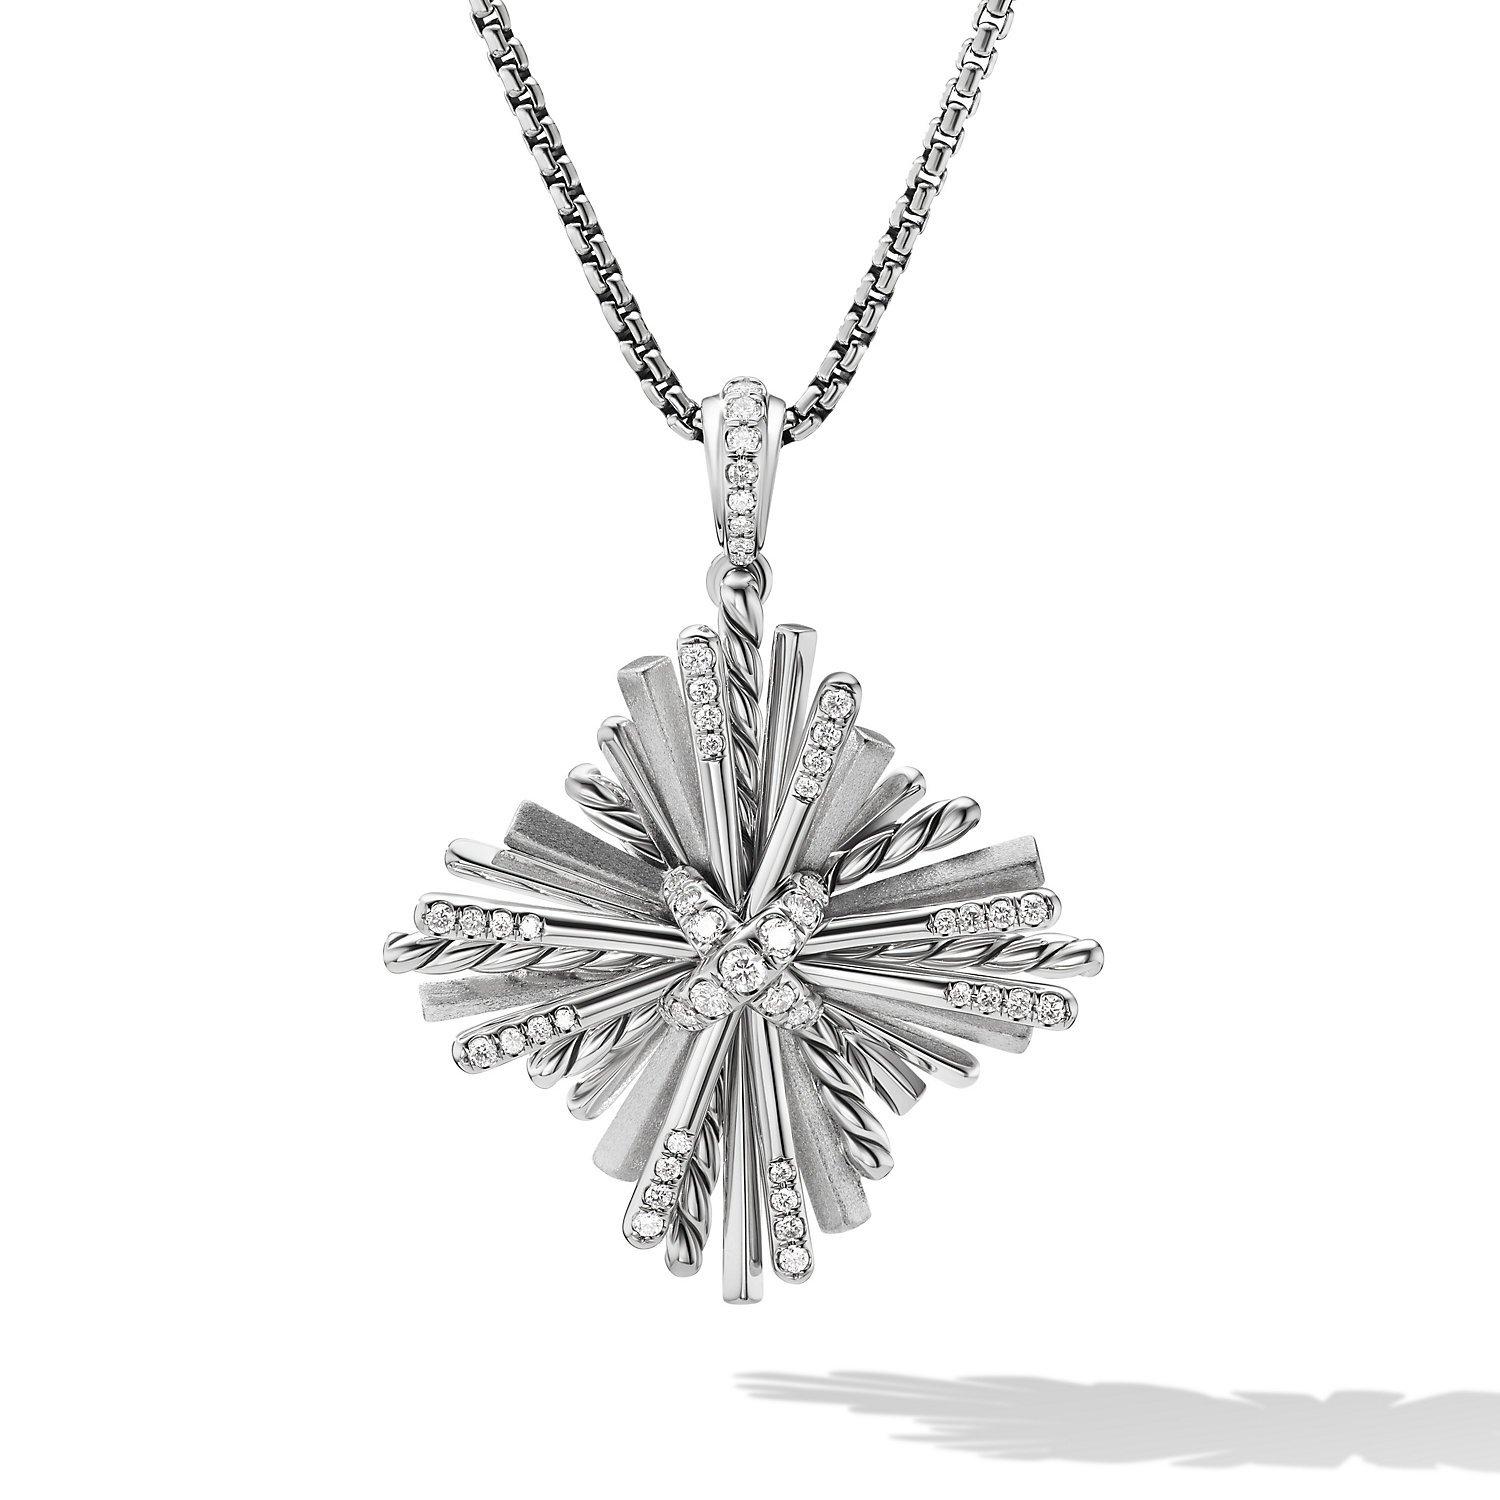 David Yurman Angelika Four Point Pendant Necklace in Sterling Silver with Diamonds, 32mm